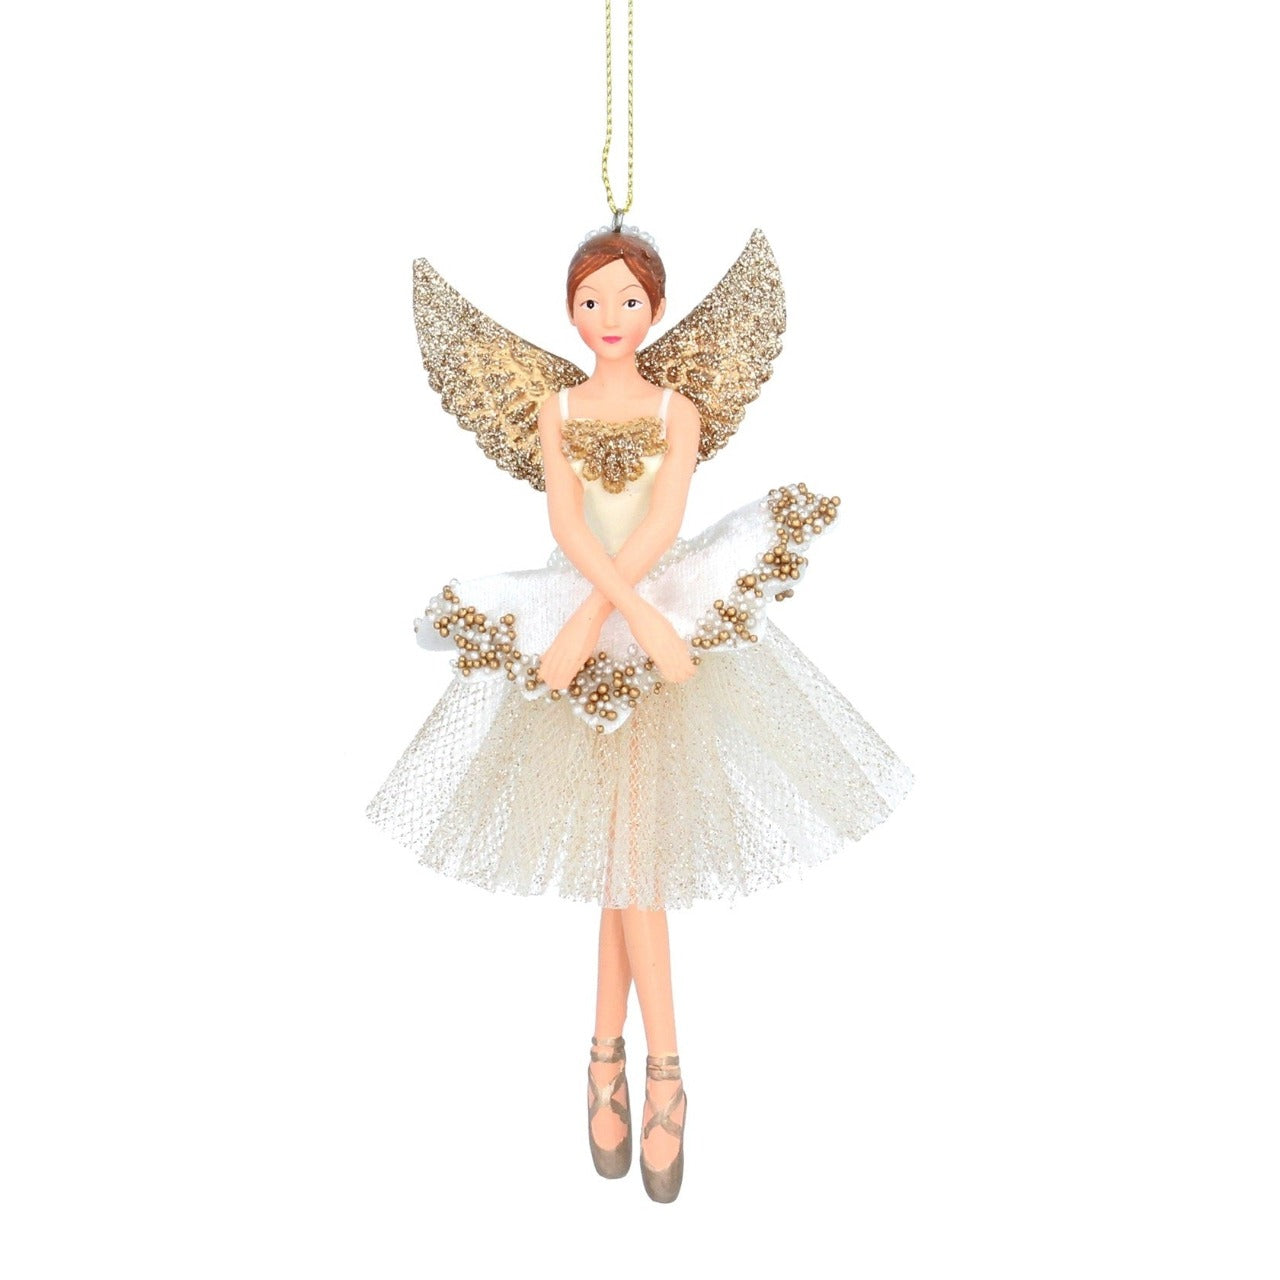 Gisela Graham Luxury Cream Velvet Fairy Large Christmas Decorations 16 cm  Browse our beautiful range of luxury Christmas tree decorations, baubles & ornaments for your tree this Christmas.  Add style to your Christmas tree with these elegant Christmas Luxury Velvet Fairy decorated with cream and golden fabric.